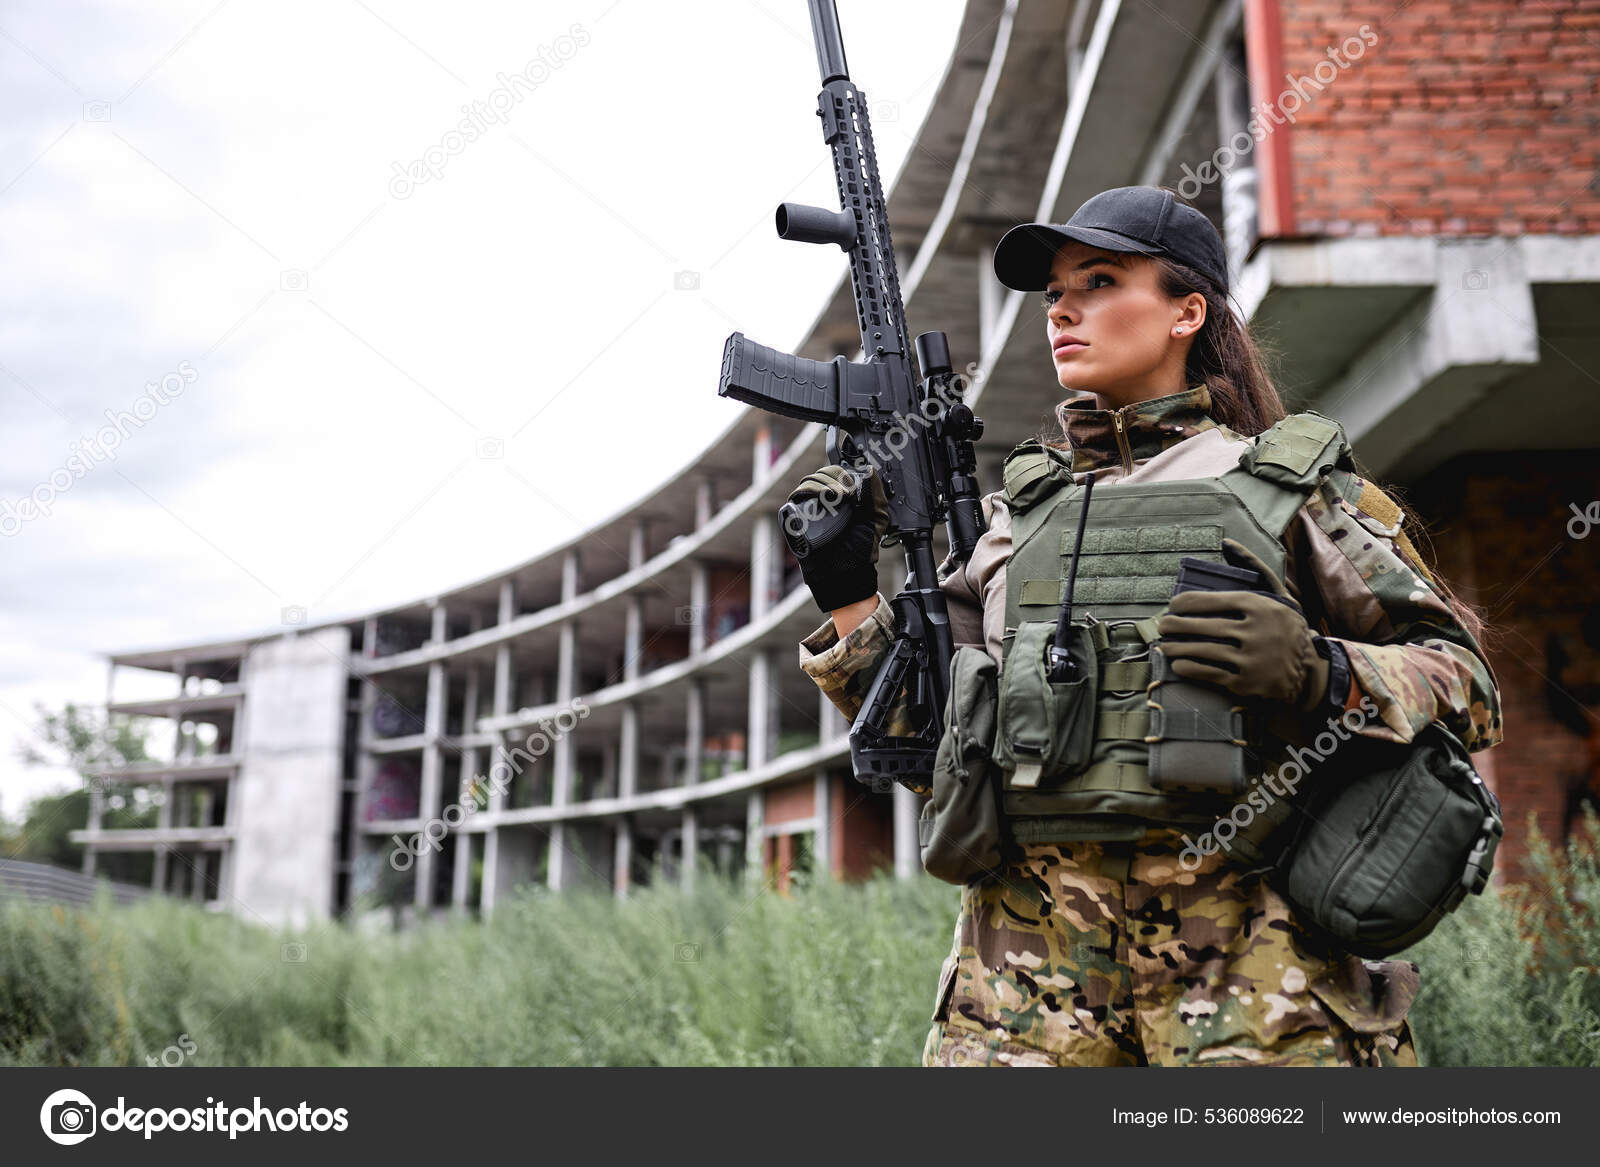 Military lady woman in tactical gear posing for photo in grass